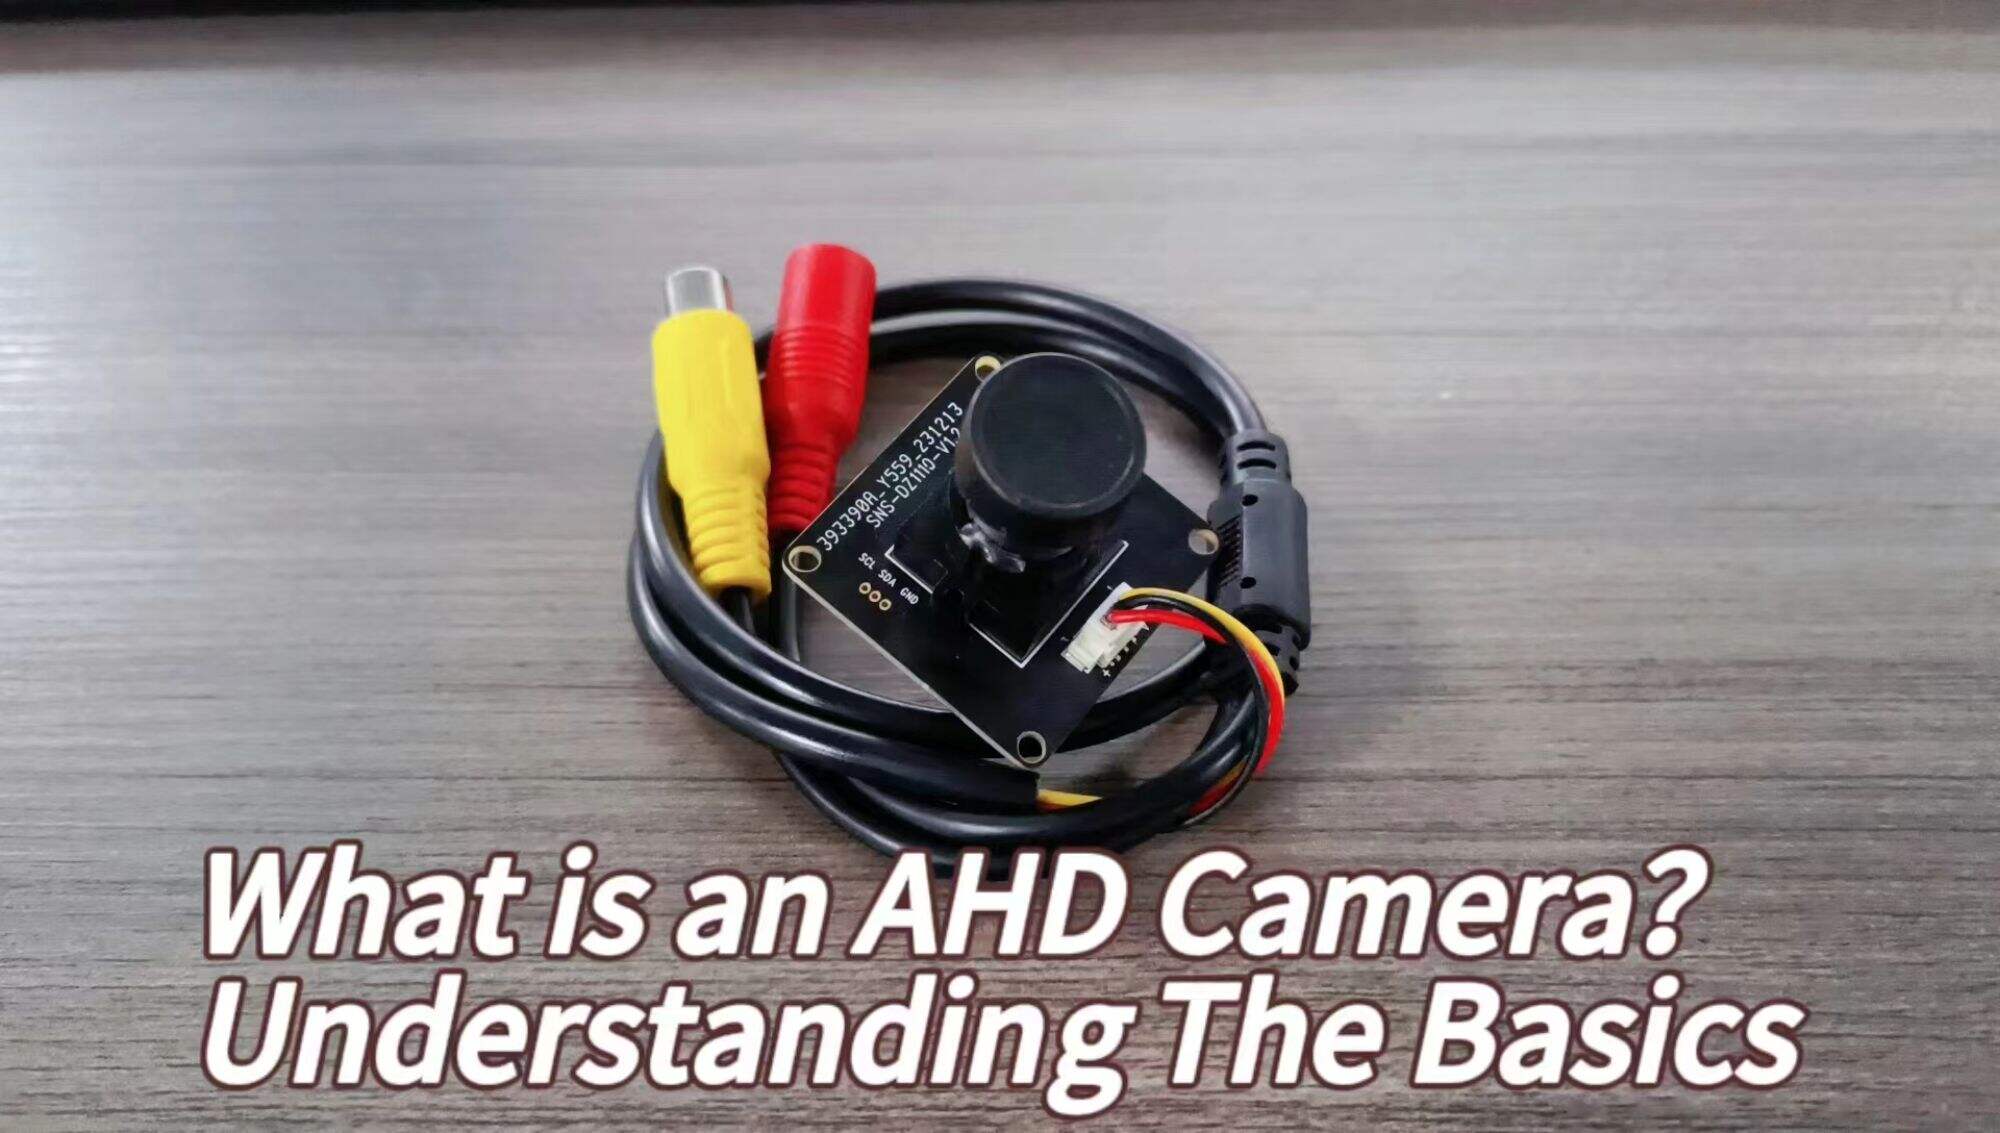 What is an AHD Camera? Understanding its advantages